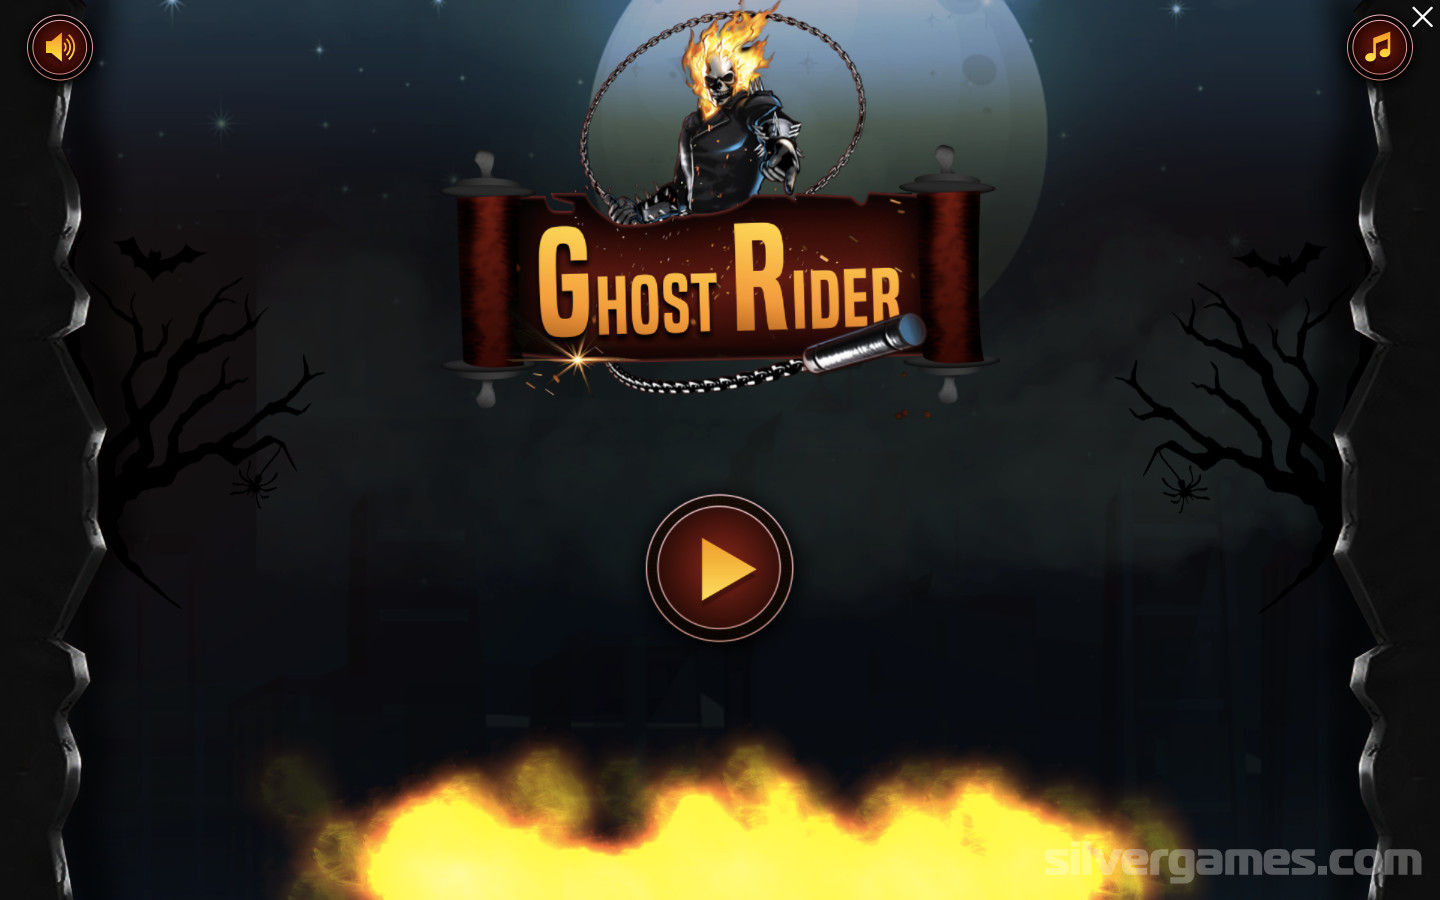 christopher schuette recommends ghost rider online free pic